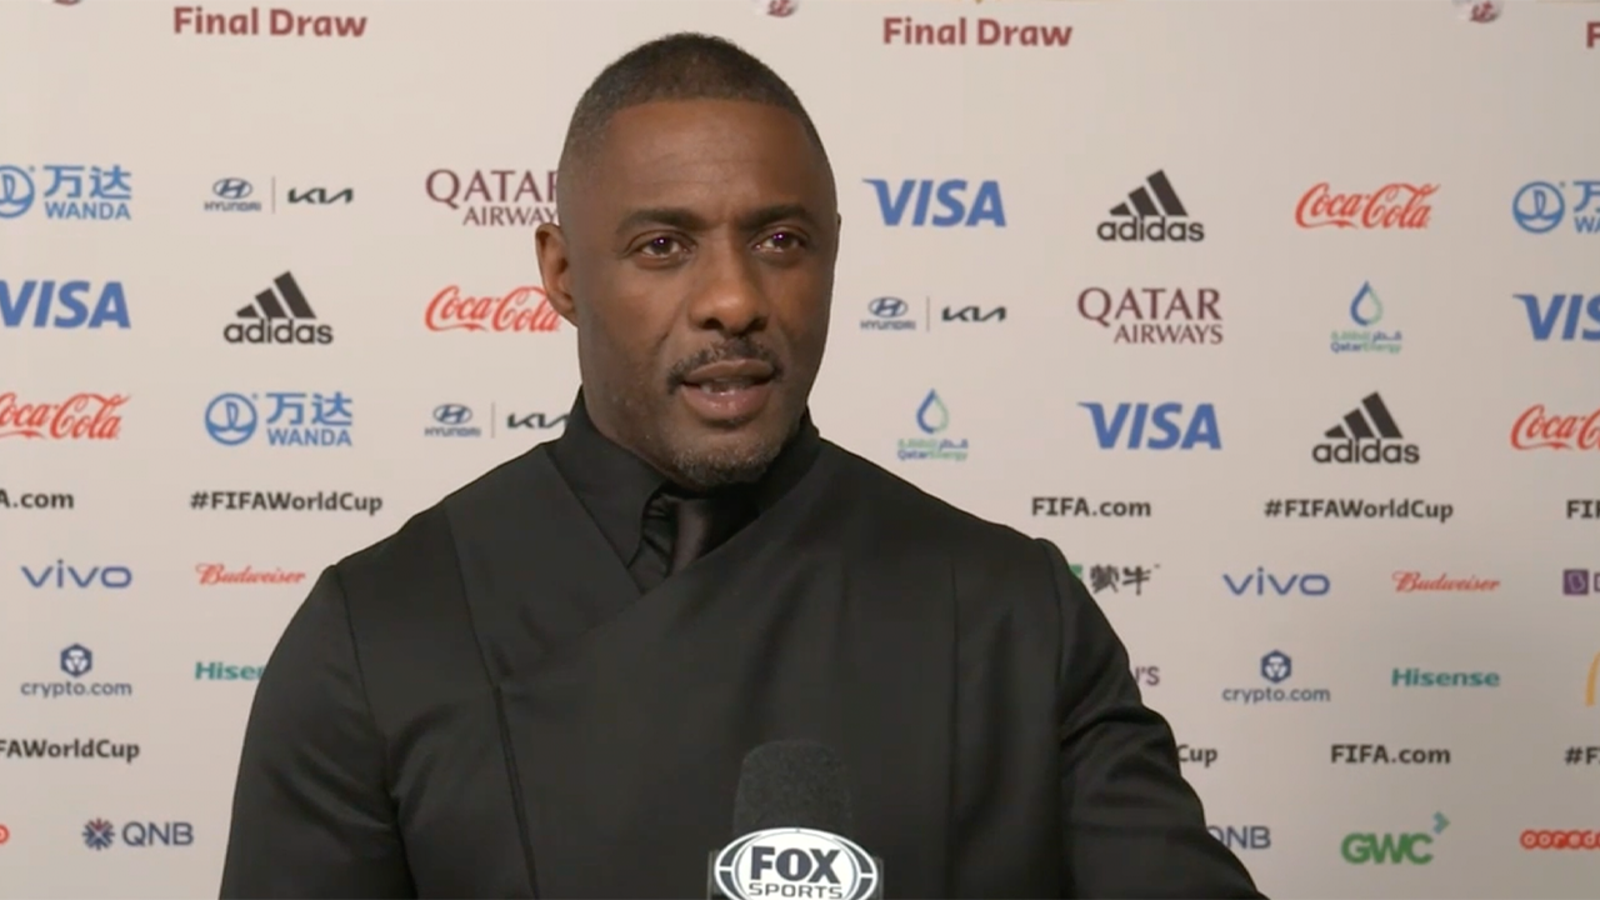 Idris Elba: 'I can't wait for the England vs. USA game'